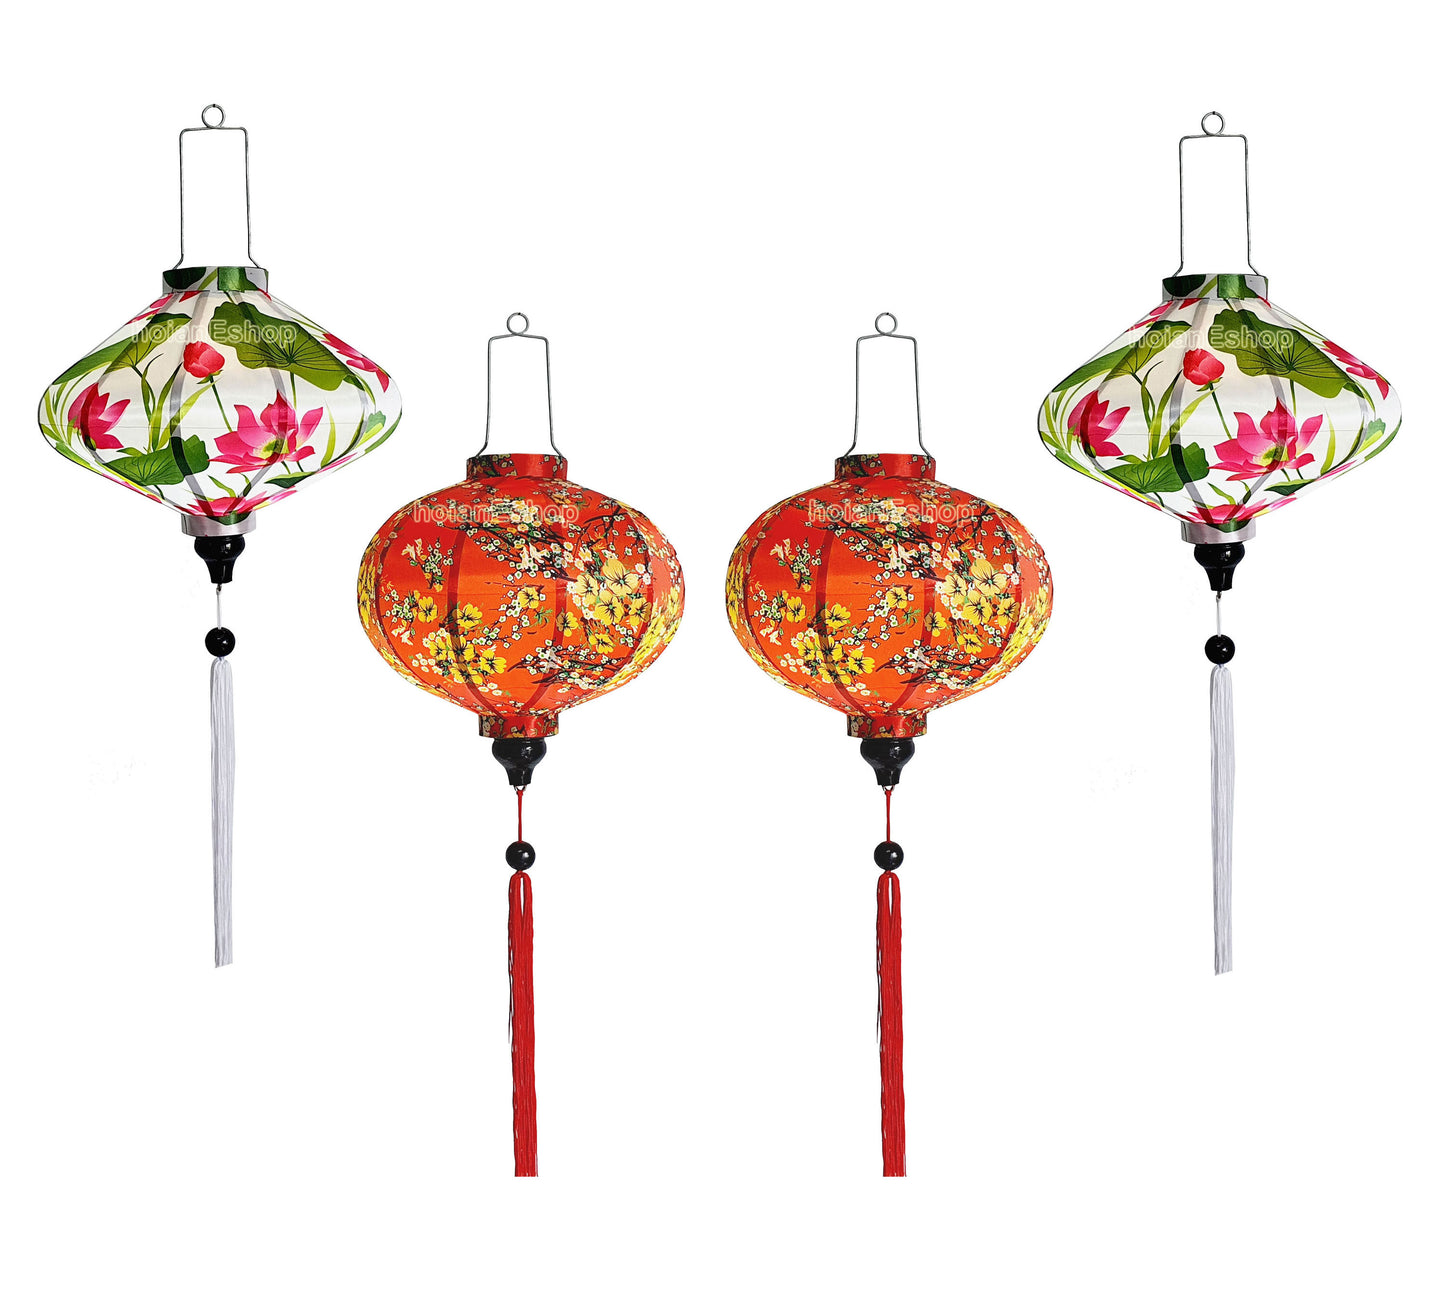 4 Vietnamese Hoi An Silk Lanterns with Apricot flowers fabric - Cherry blossom fabric - New Year Decorations - TET Decorations